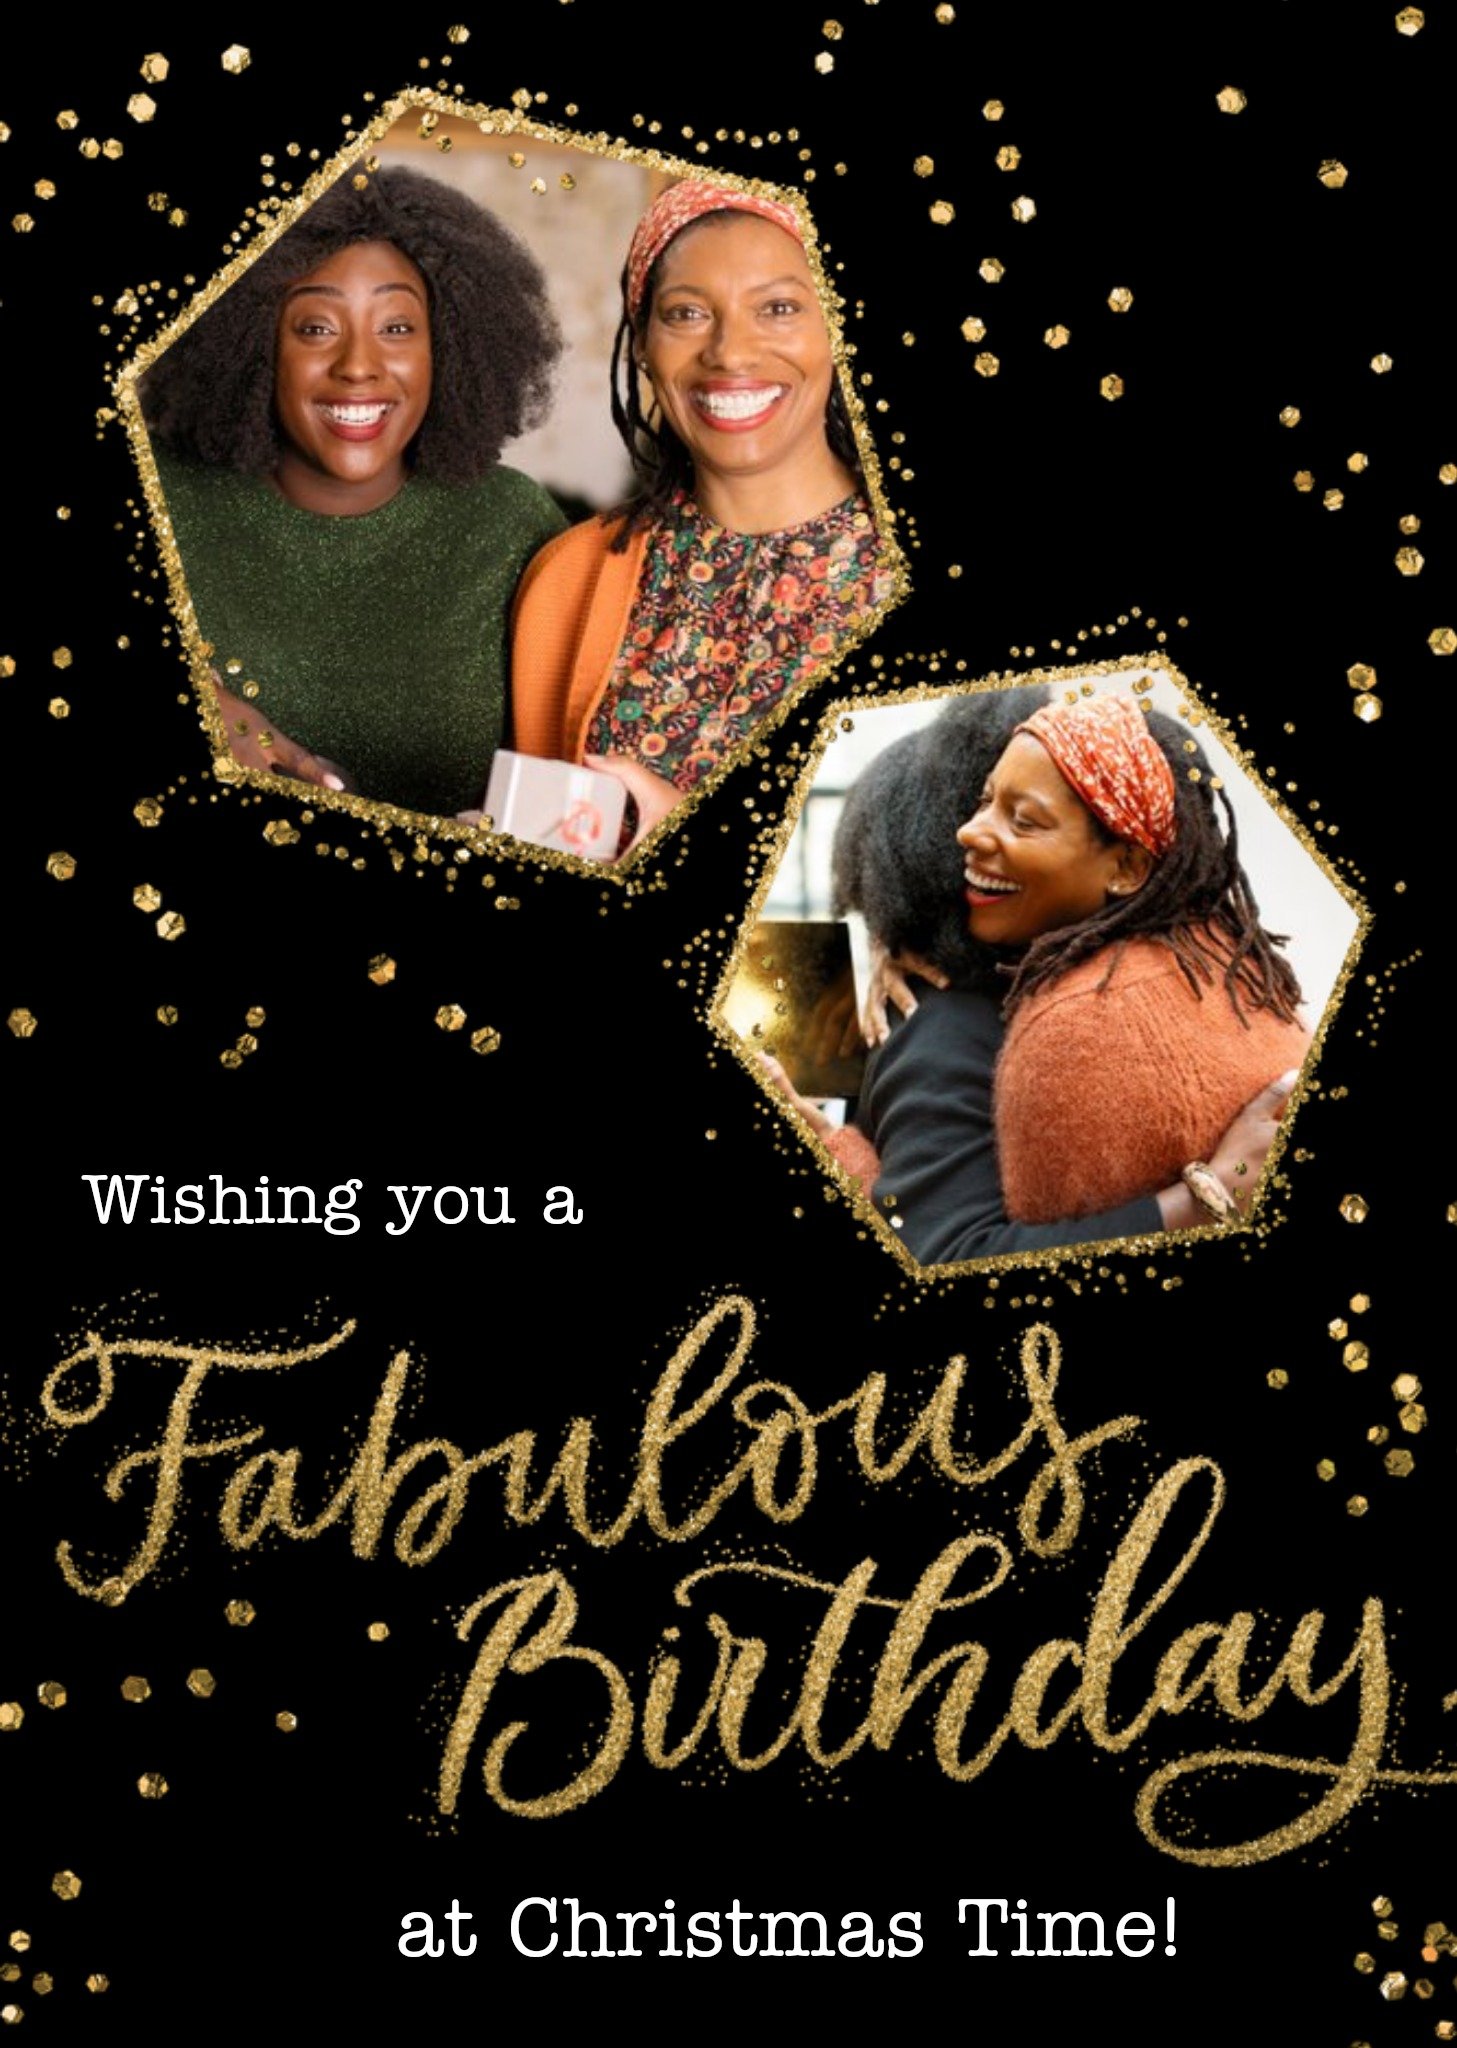 Moonpig Metallic Gold Lettering Fabulous Birthday At Time Photo Upload Card, Large